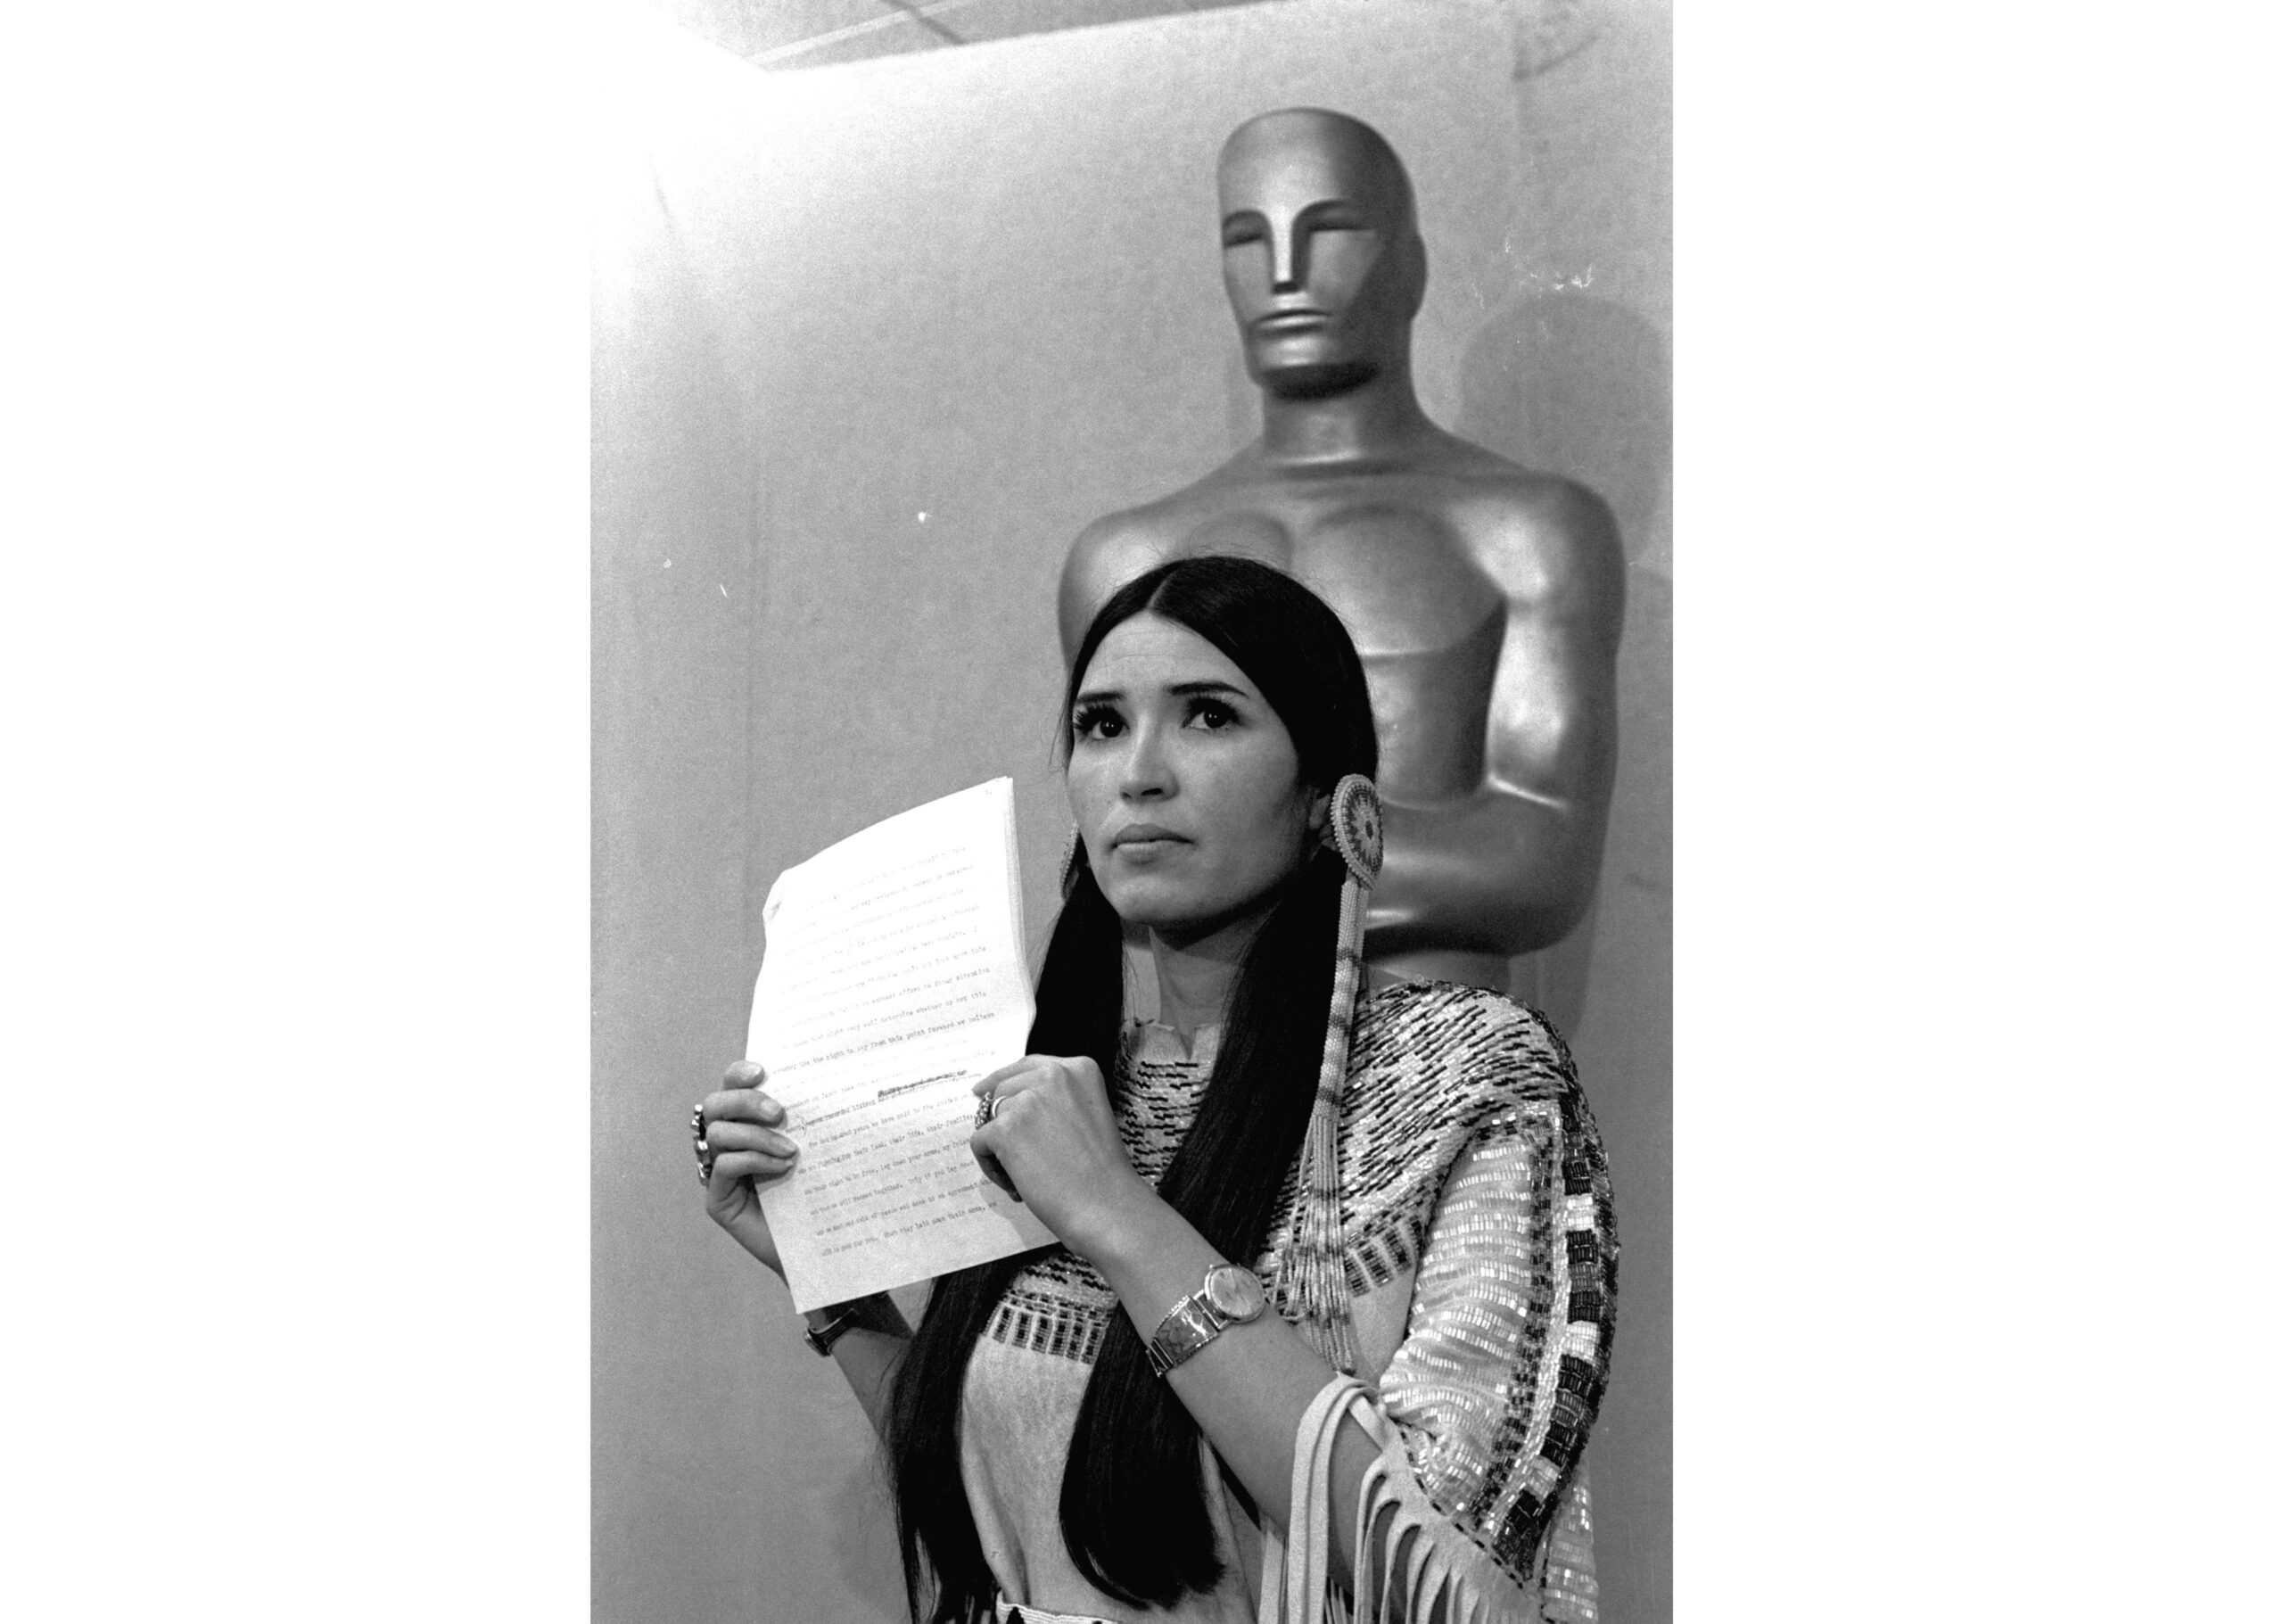 FILE - Sacheen Littlefeather, a Native American activist, tells the audience at the Academy Awards ceremony in Los Angeles, March 27, 1973, that Marlon Brando was declining to accept his Oscar as best actor for his role in "The Godfather." Sacheen Littlefeather died Sunday, Oct. 2, 2022, at her home in Marin County, Calif. She was 75. (AP Photo/File)